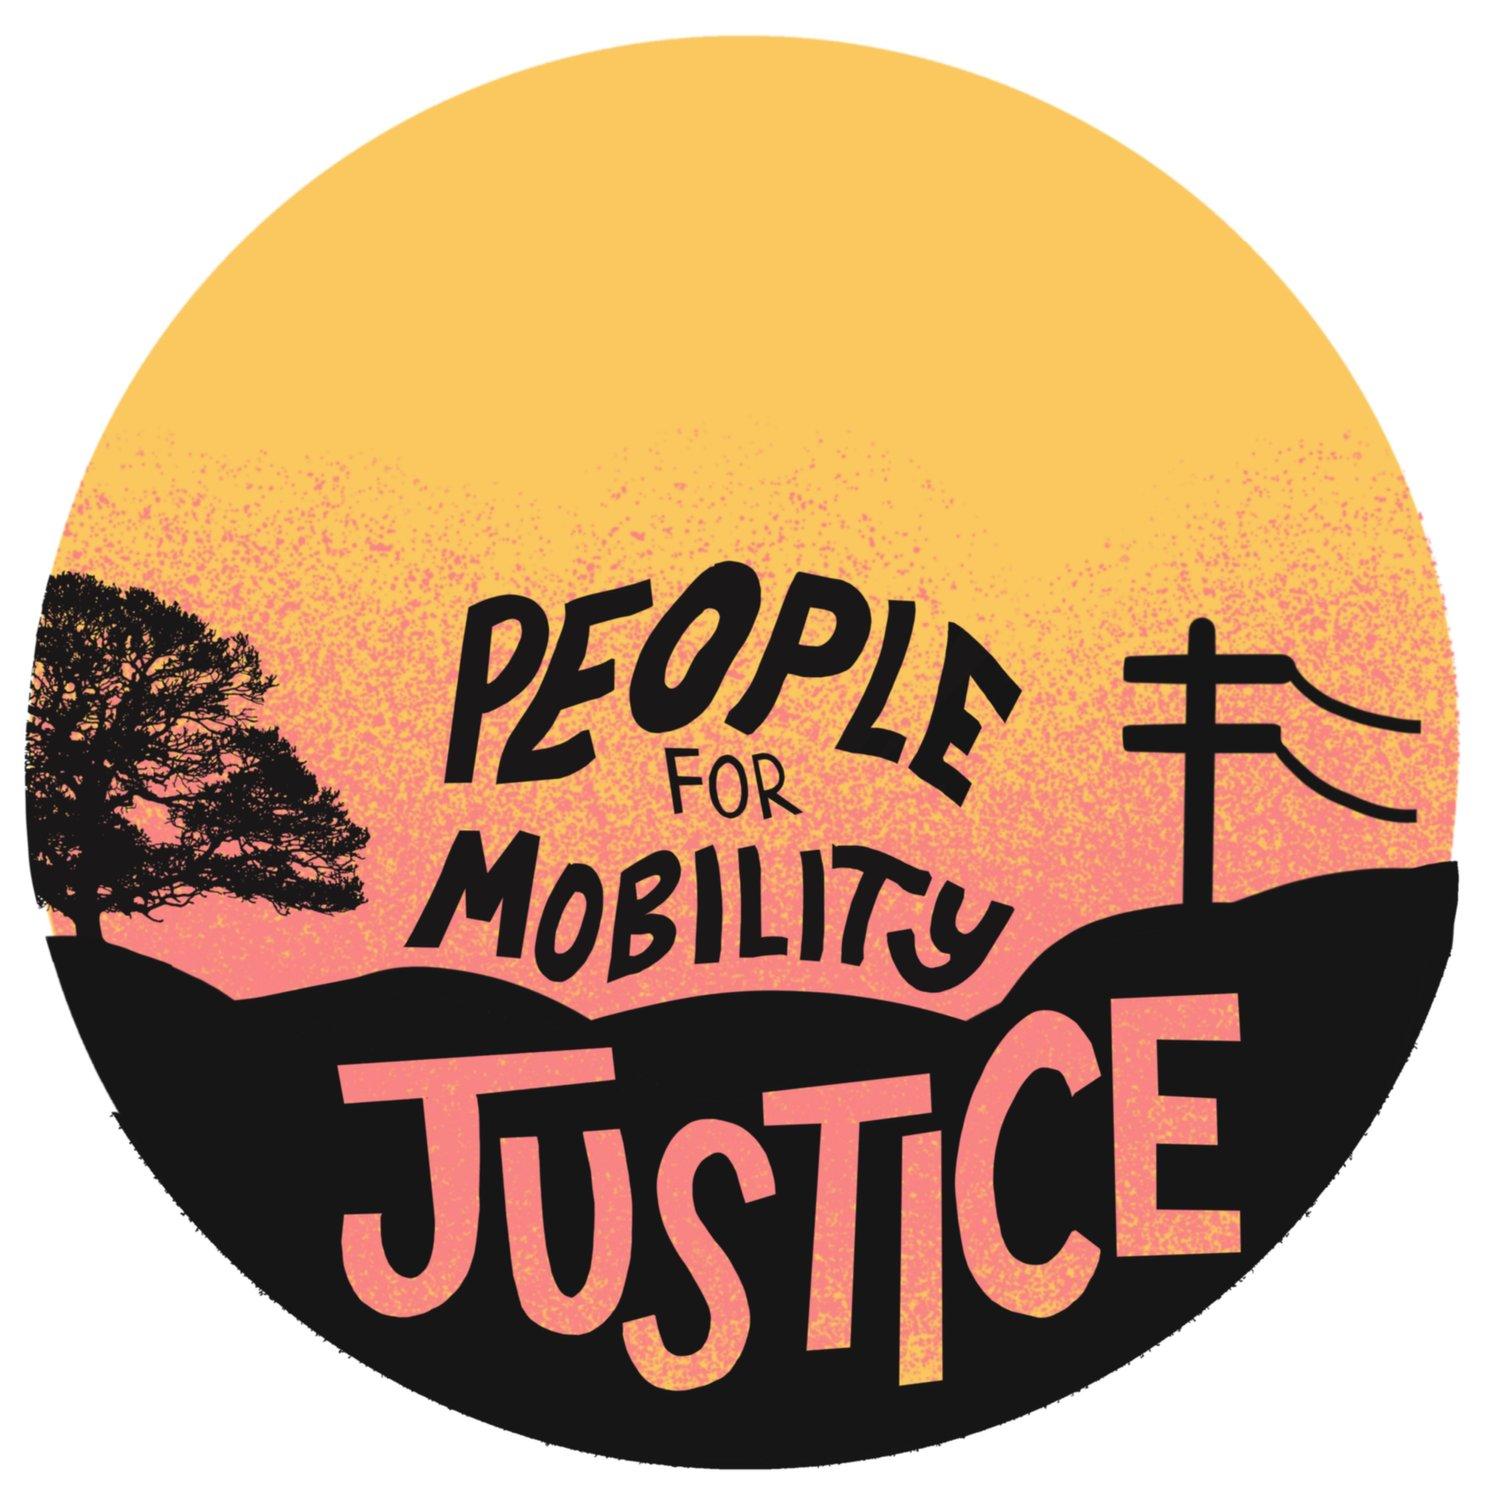 People For Mobility Justice logo